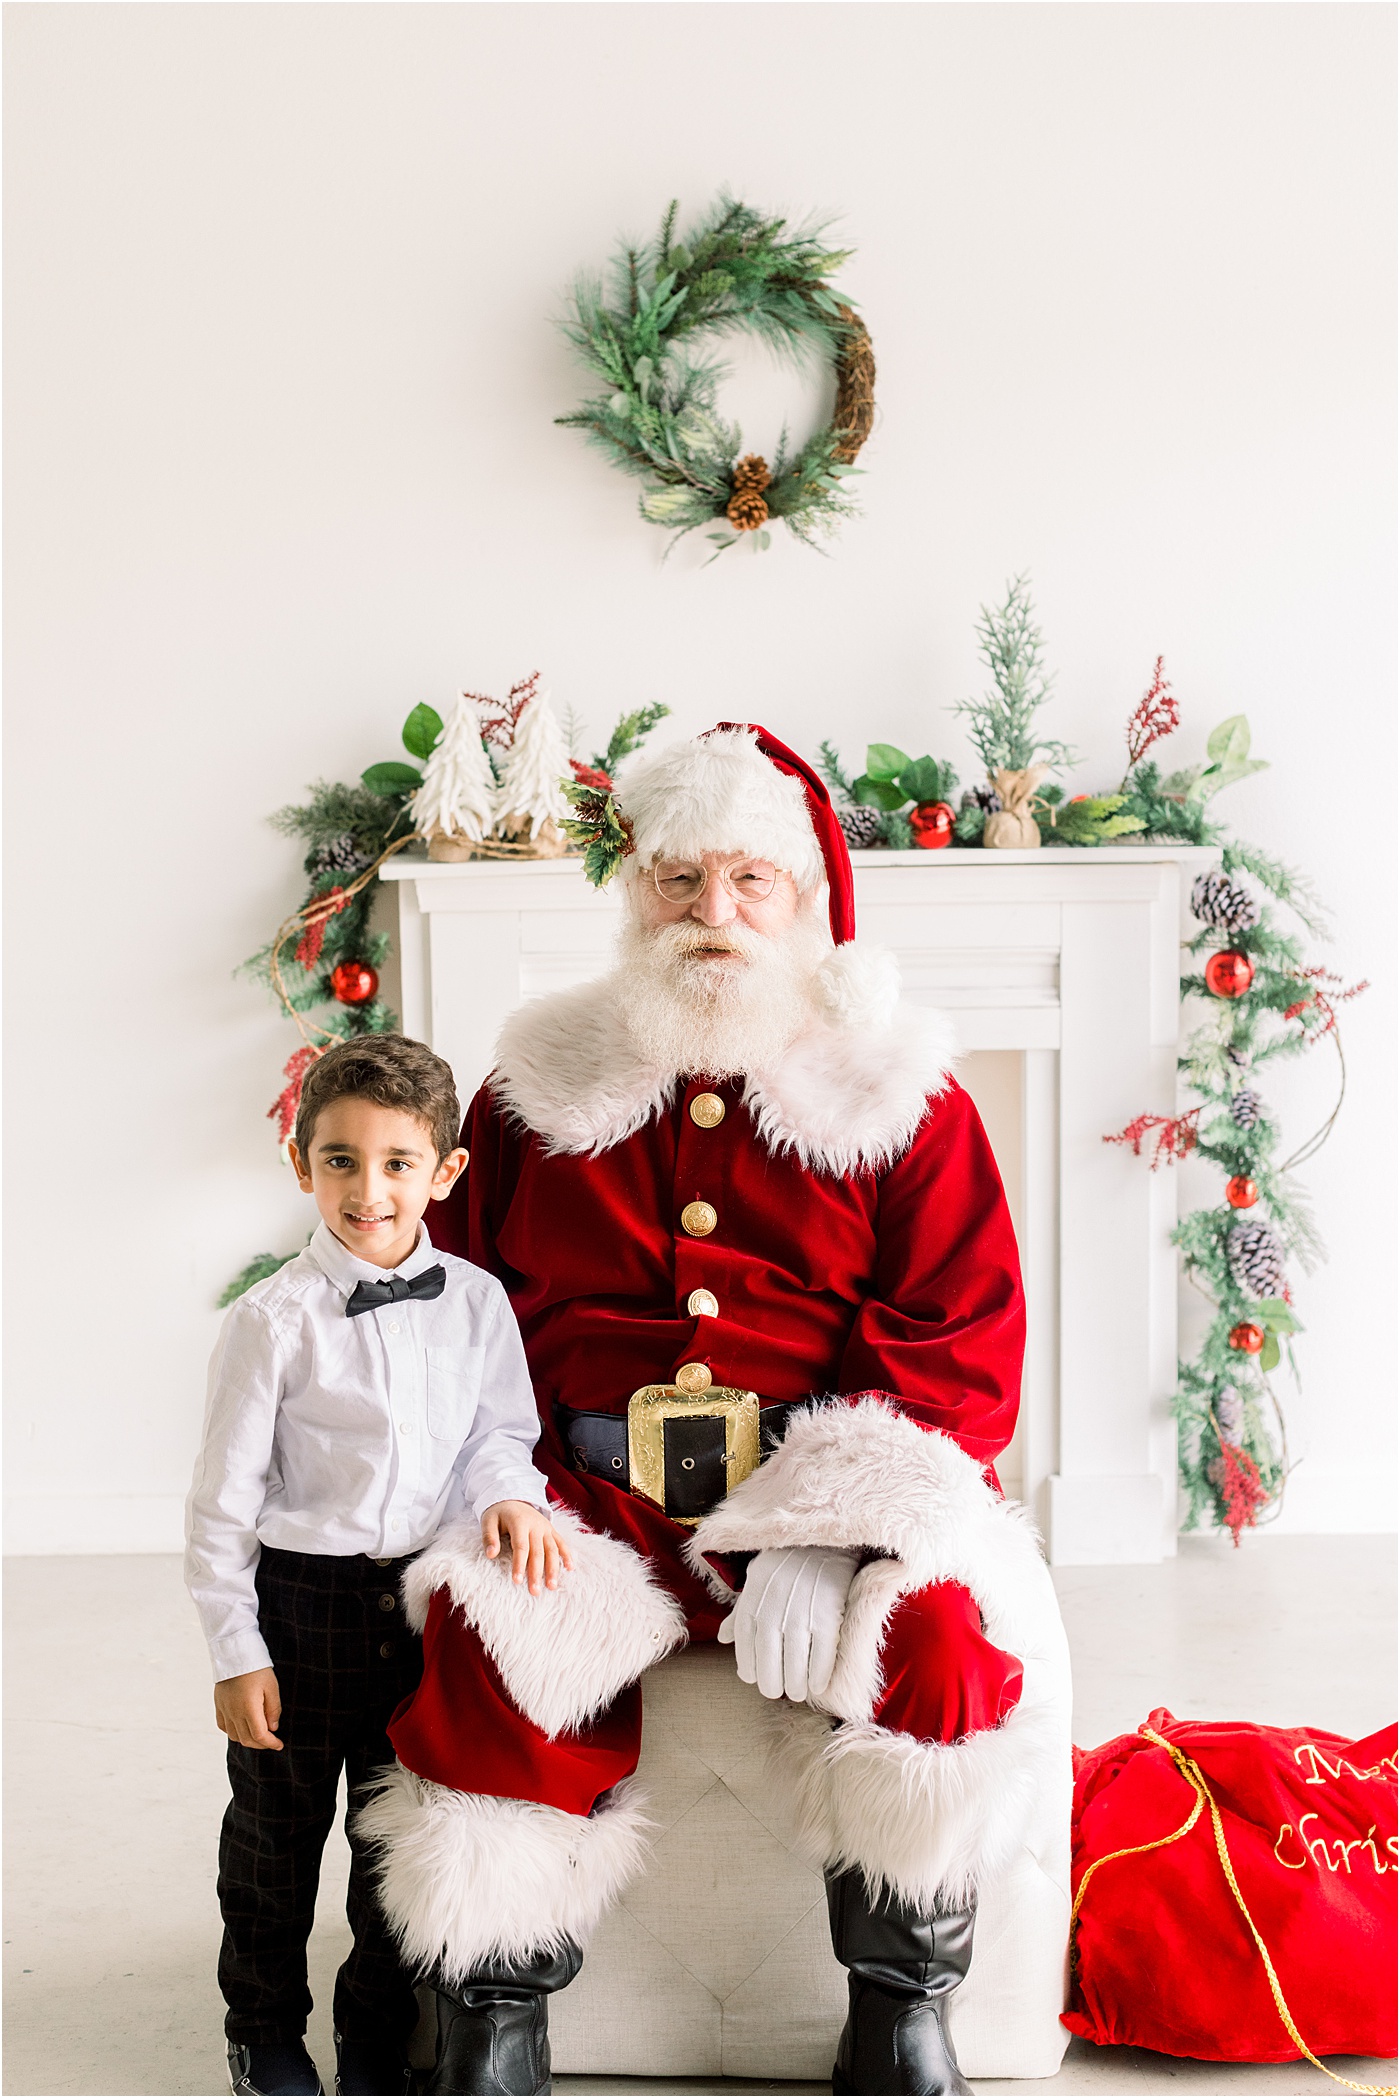 Little boy smiling with Santa during a pictures with Santa event in Austin, TX by Sana Ahmed Photography.